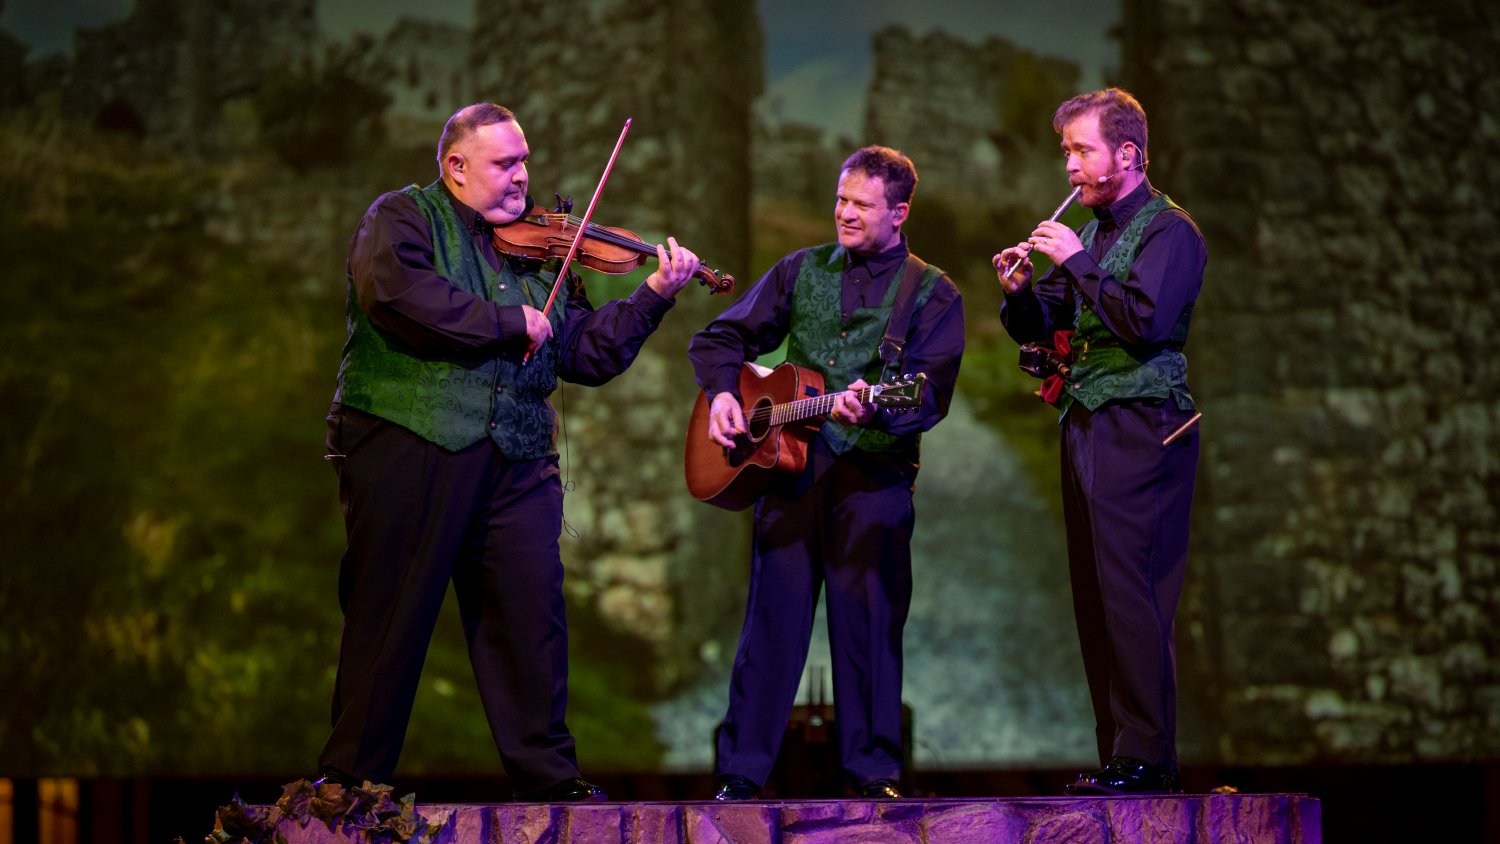 Irish themed band playing the St. Patrick's Day Celebration at Busch Gardens Williamsburg.